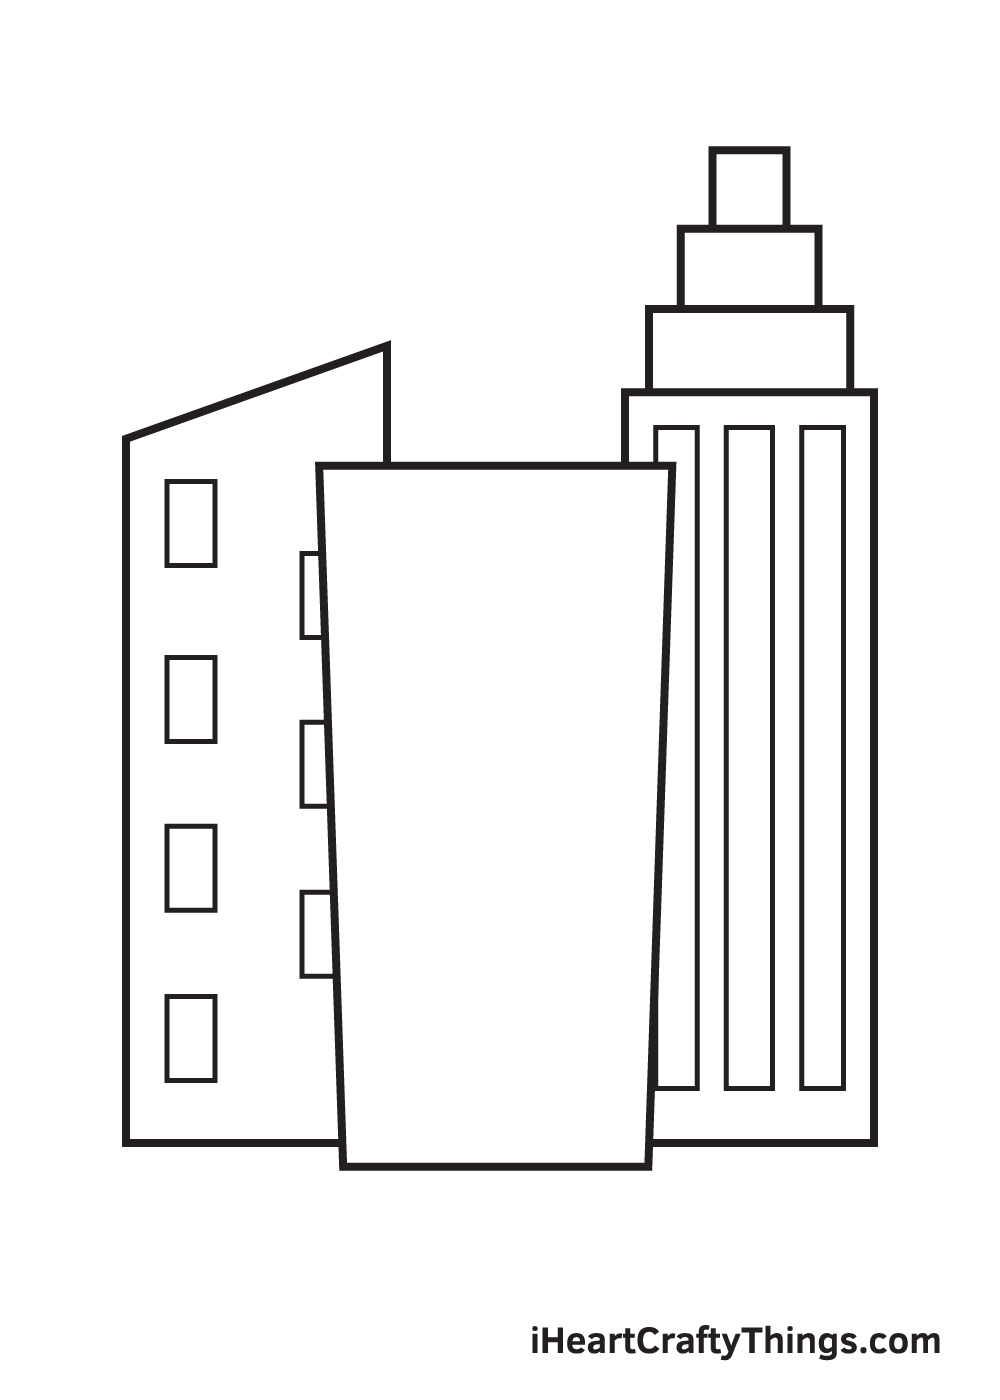 How to Draw a Skyscraper - Step-by-Step Skyscraper Drawing